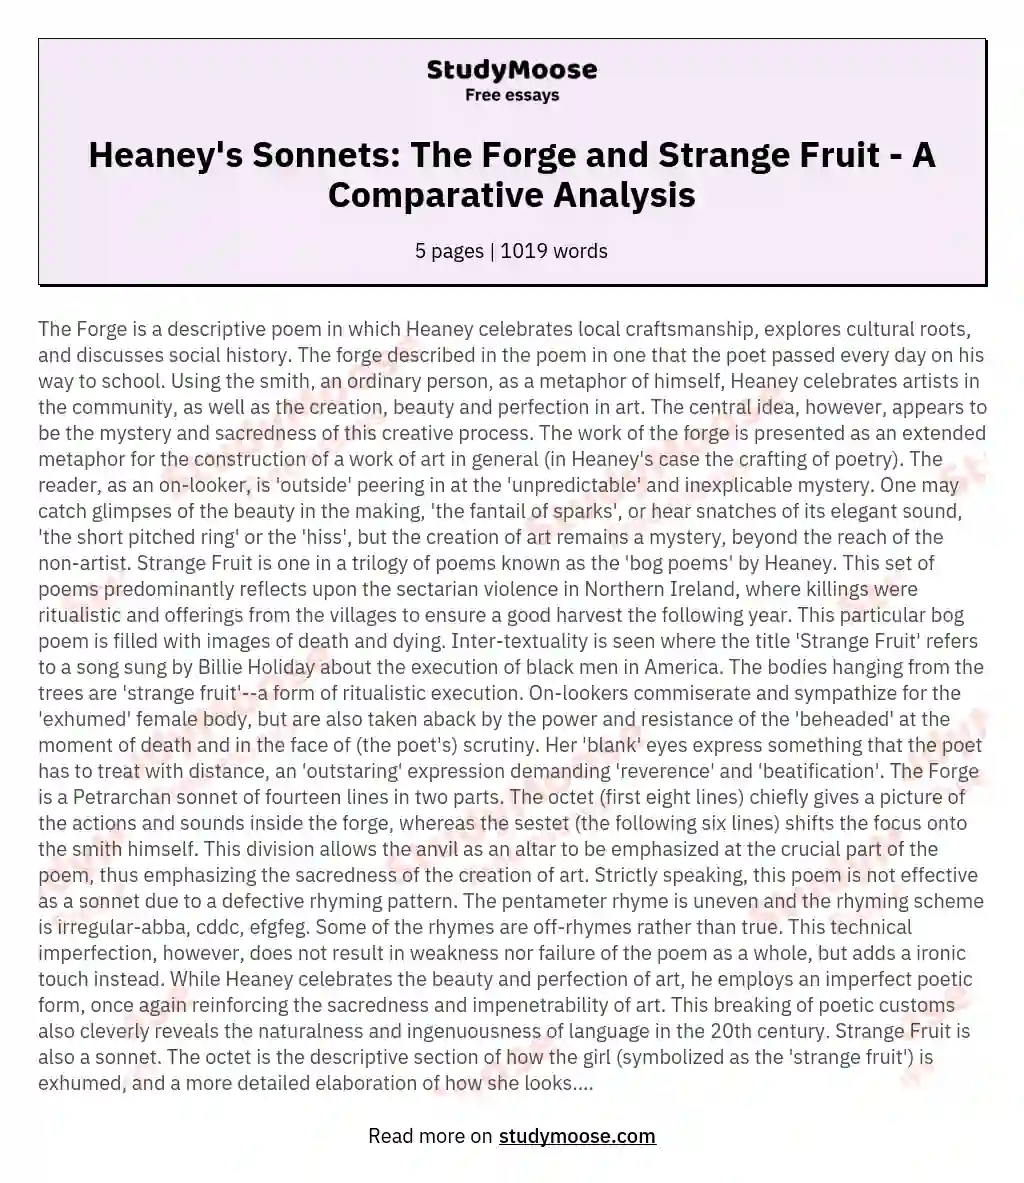 Compare and contrast two of Seamus Heaney's sonnets, 'The Forge' and 'Strange Fruit'